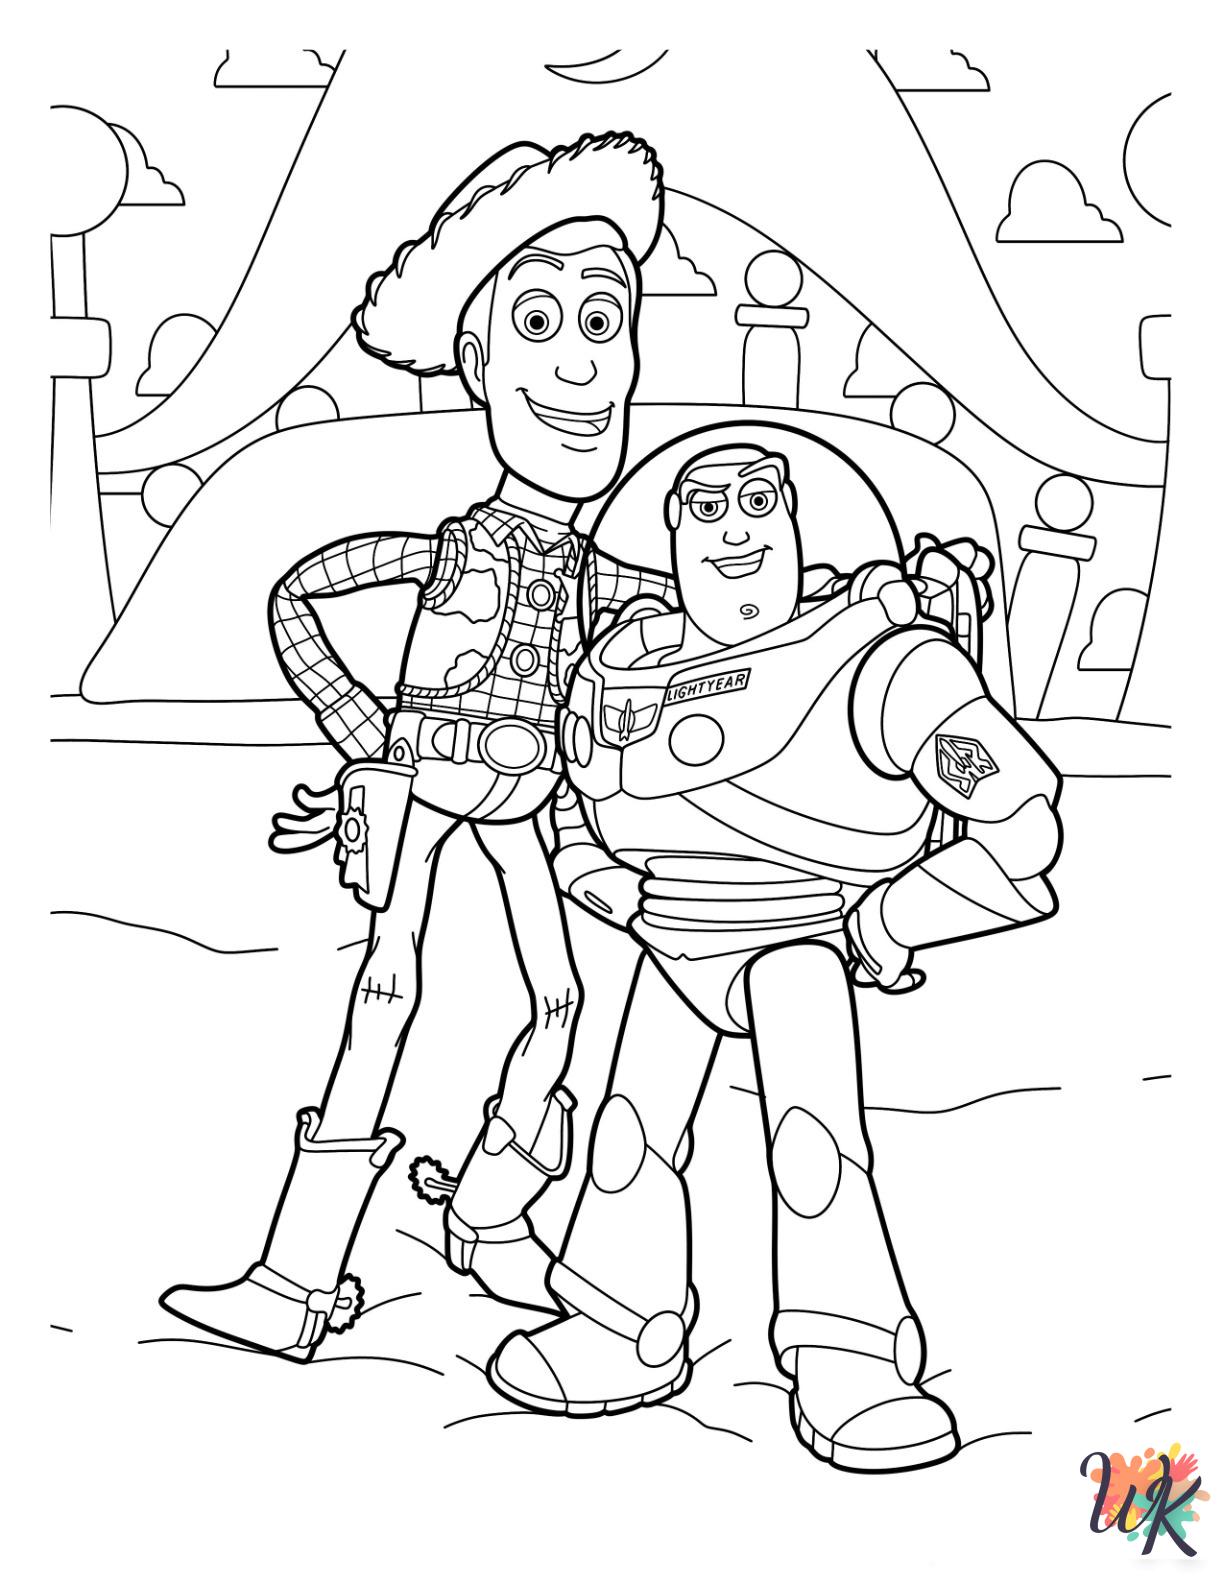 Woody coloring book pages